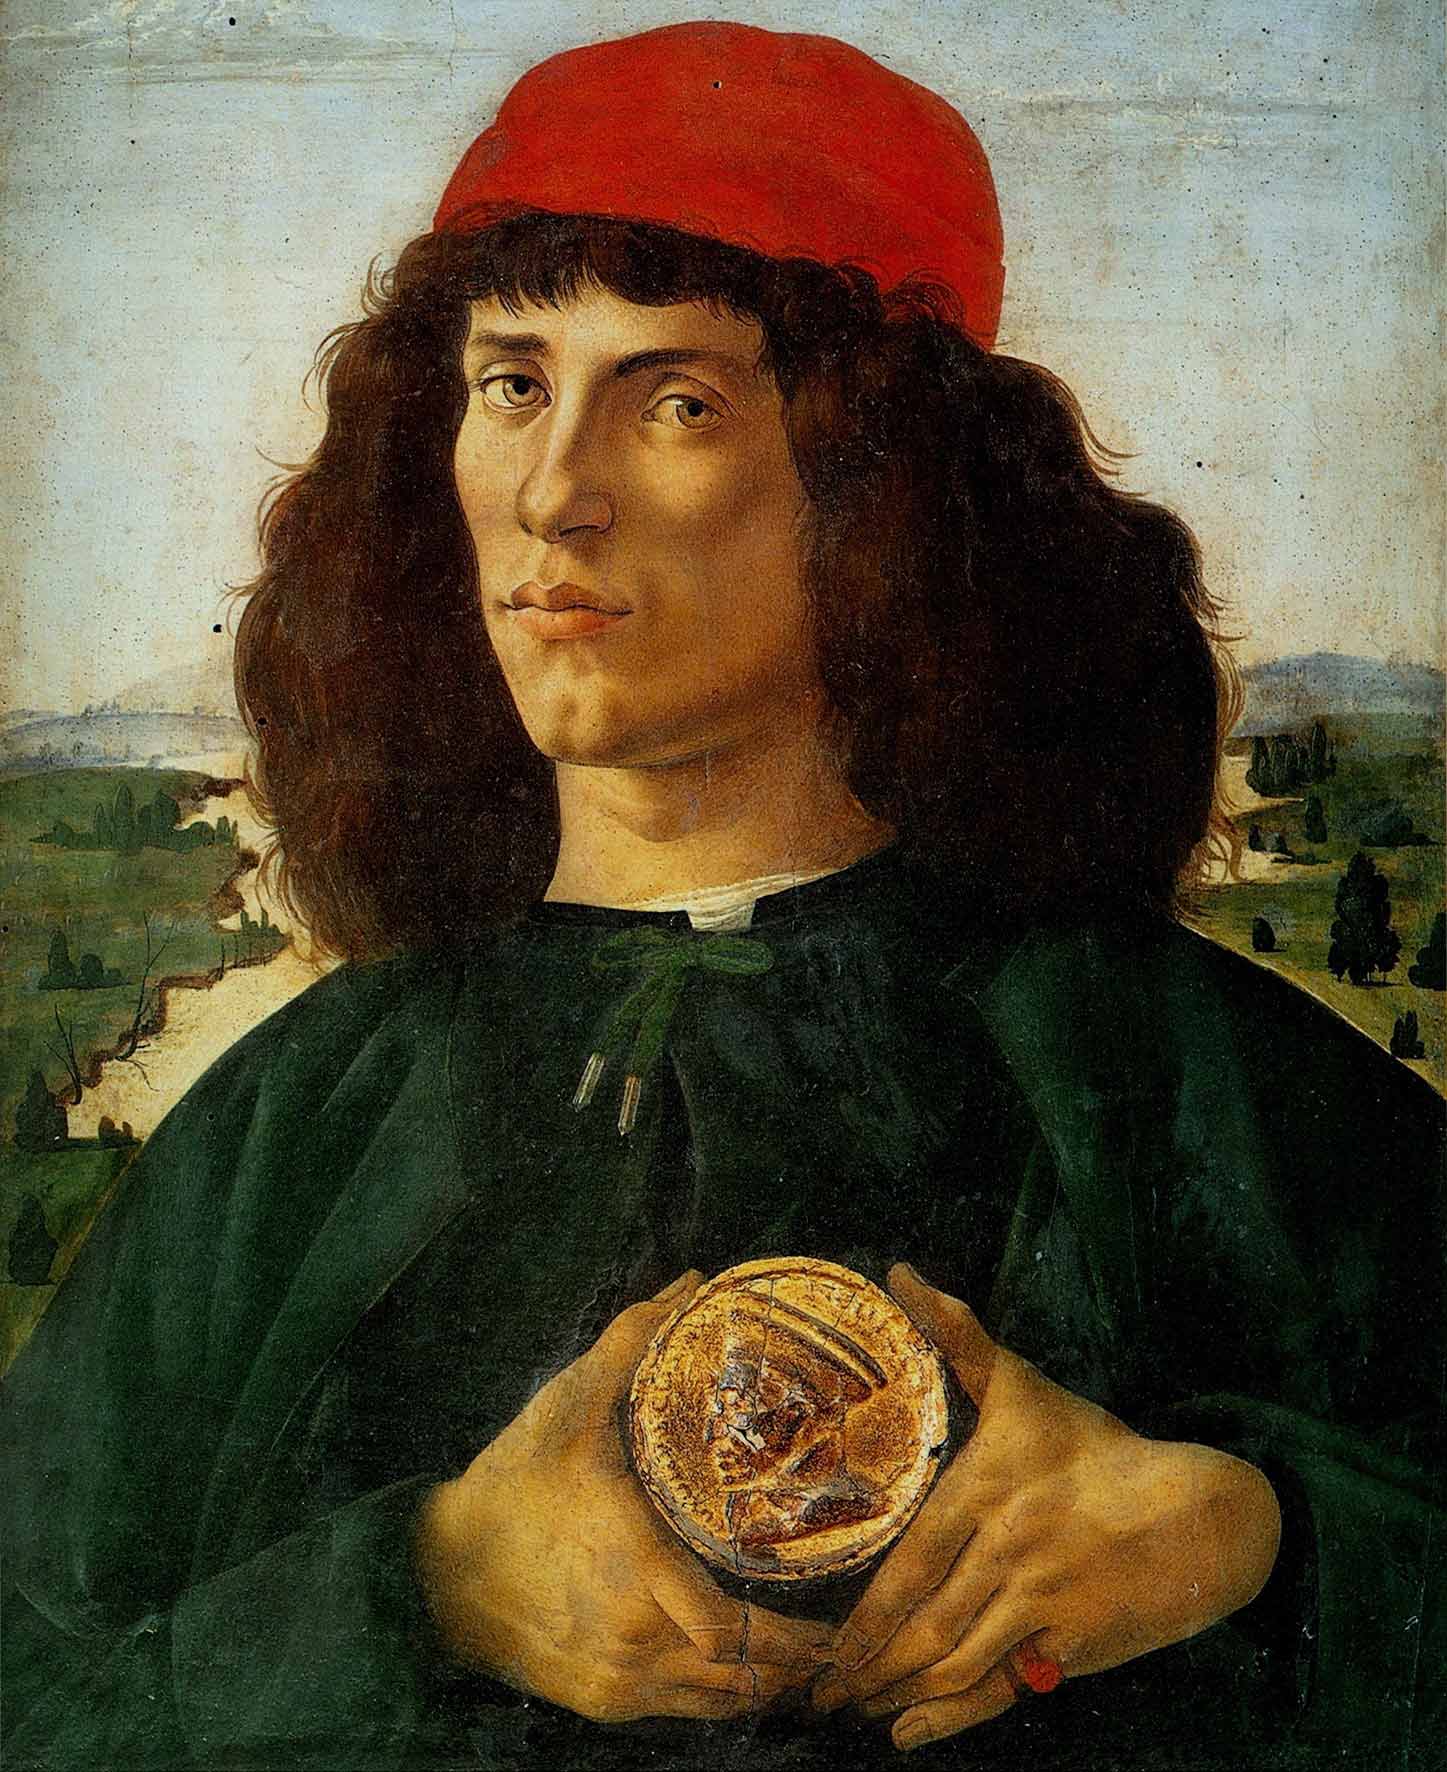 Sandro_Botticelli_-_Portrait_of_a_Man_with_a_Medal_of_Cosimo_the_Elder